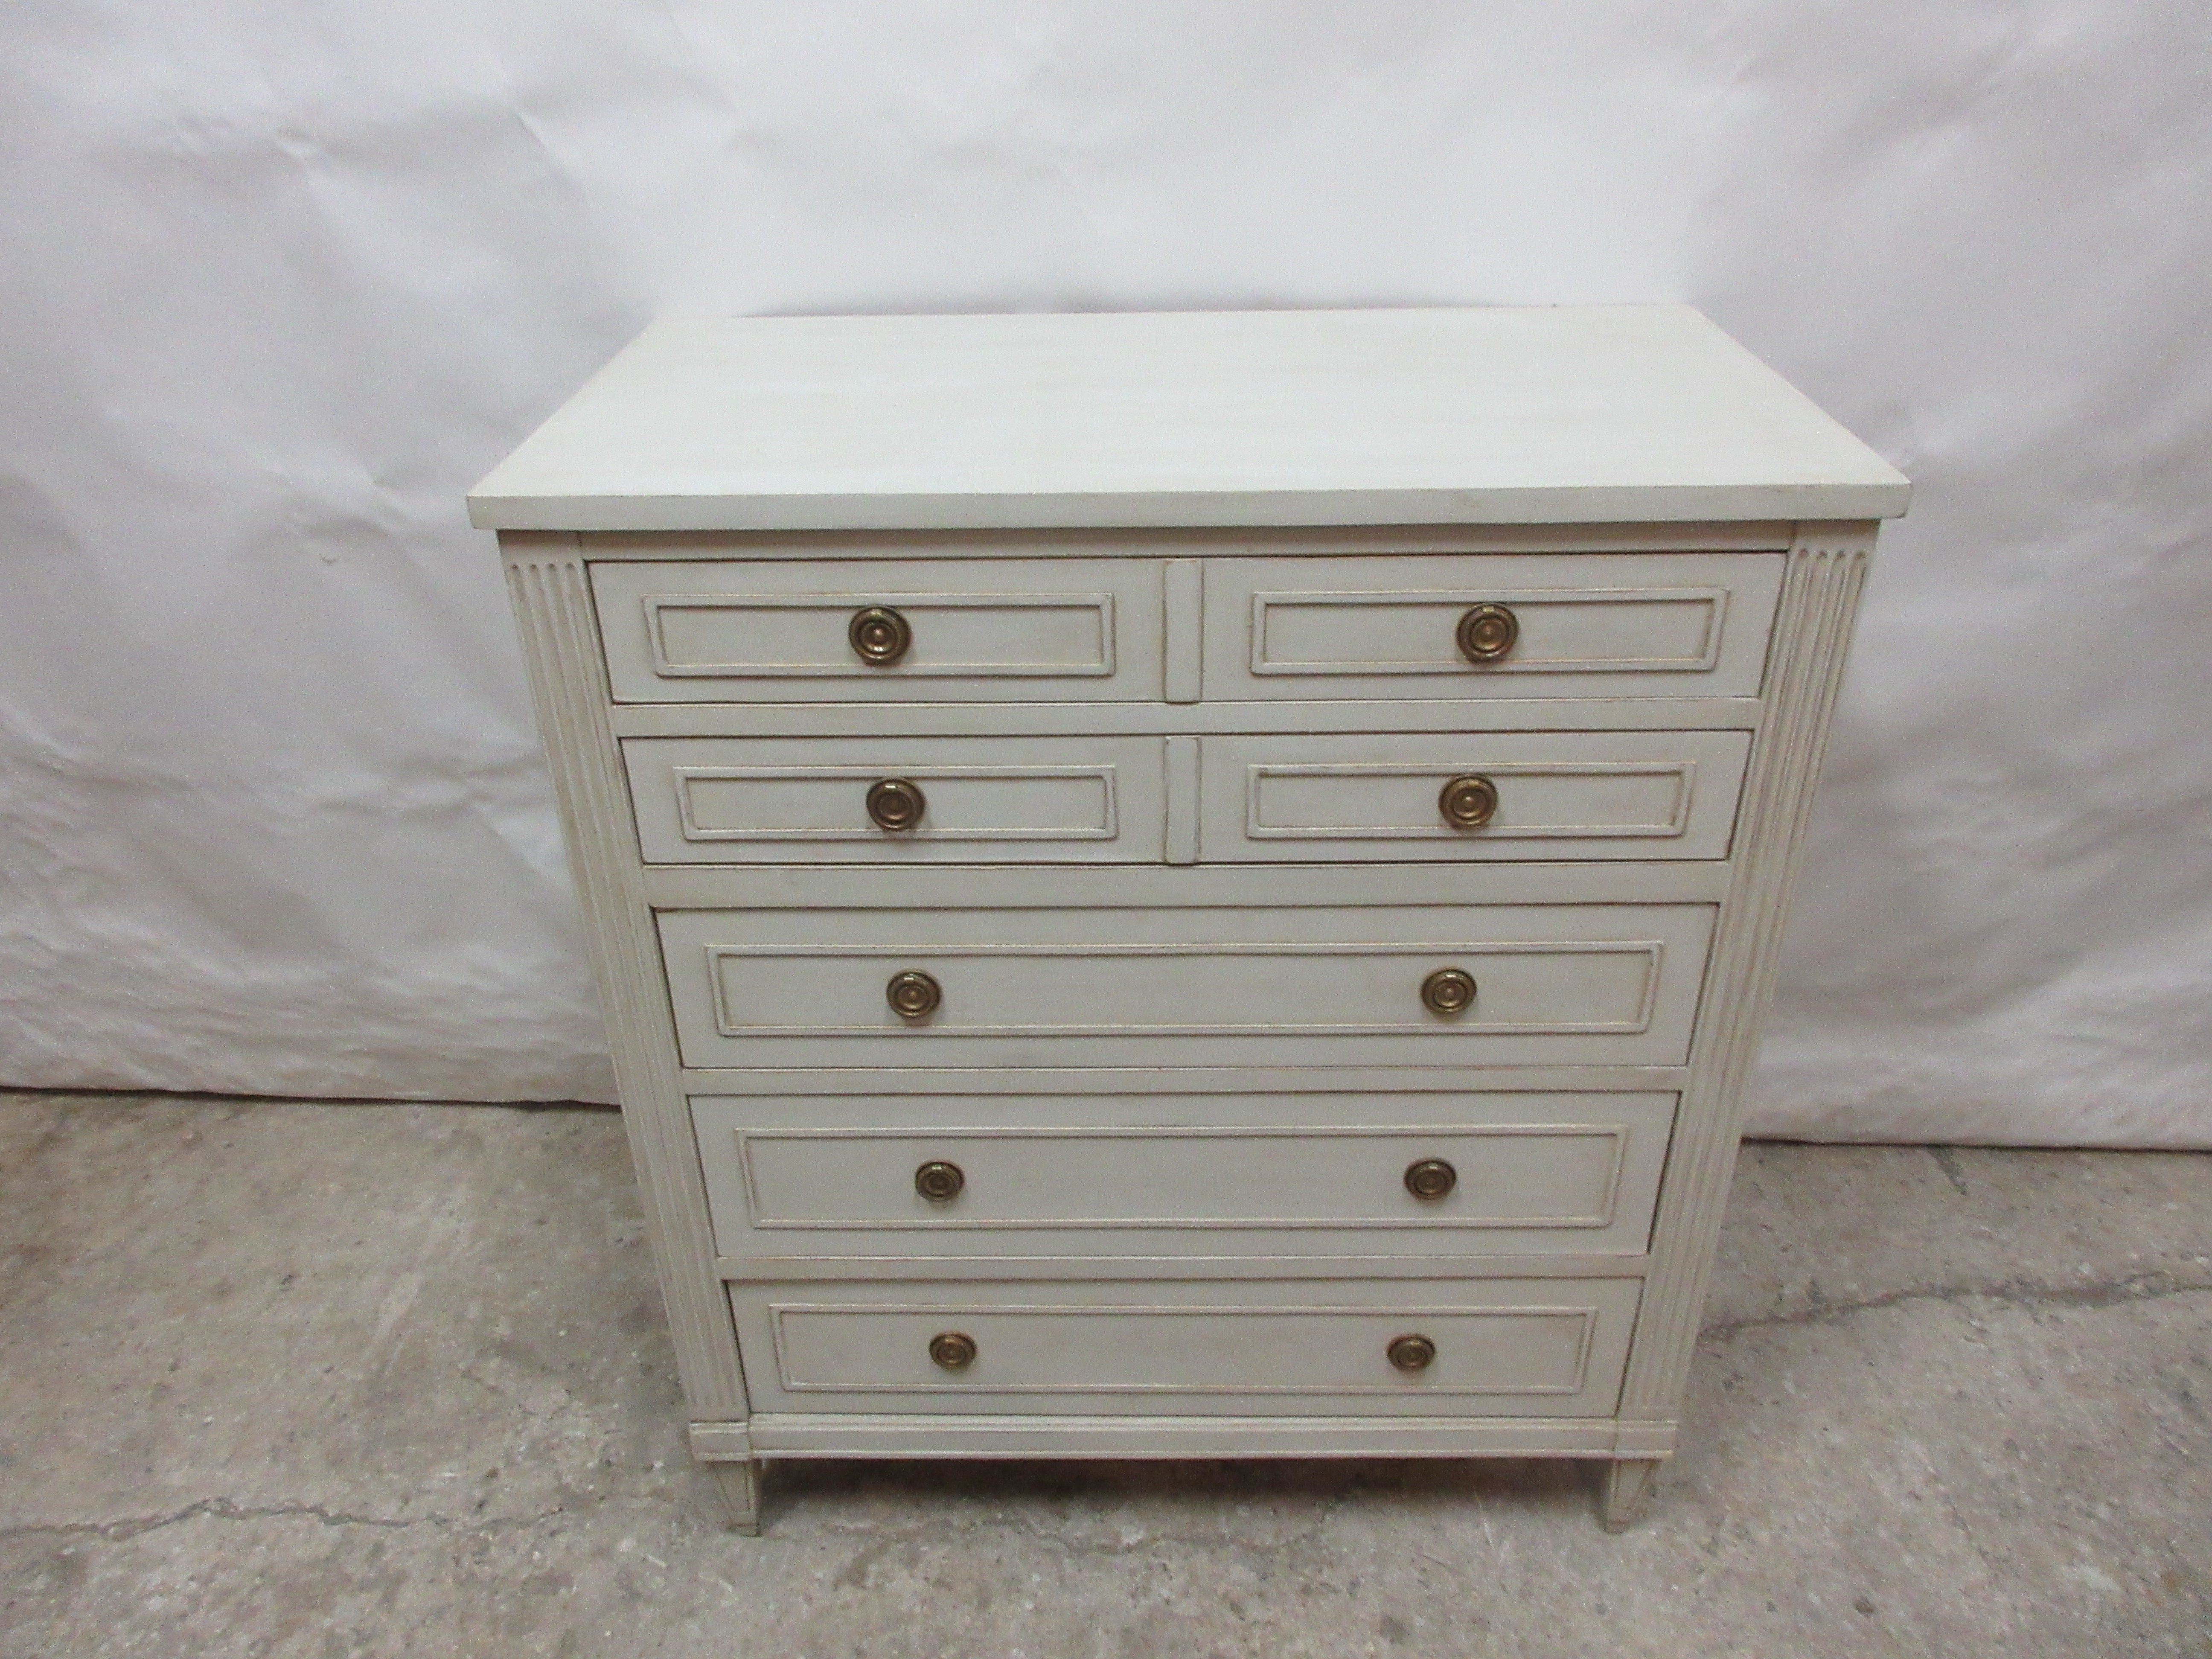 This is a Gustavian style 5 drawer chest, its been restored and repainted with Milk Paints 